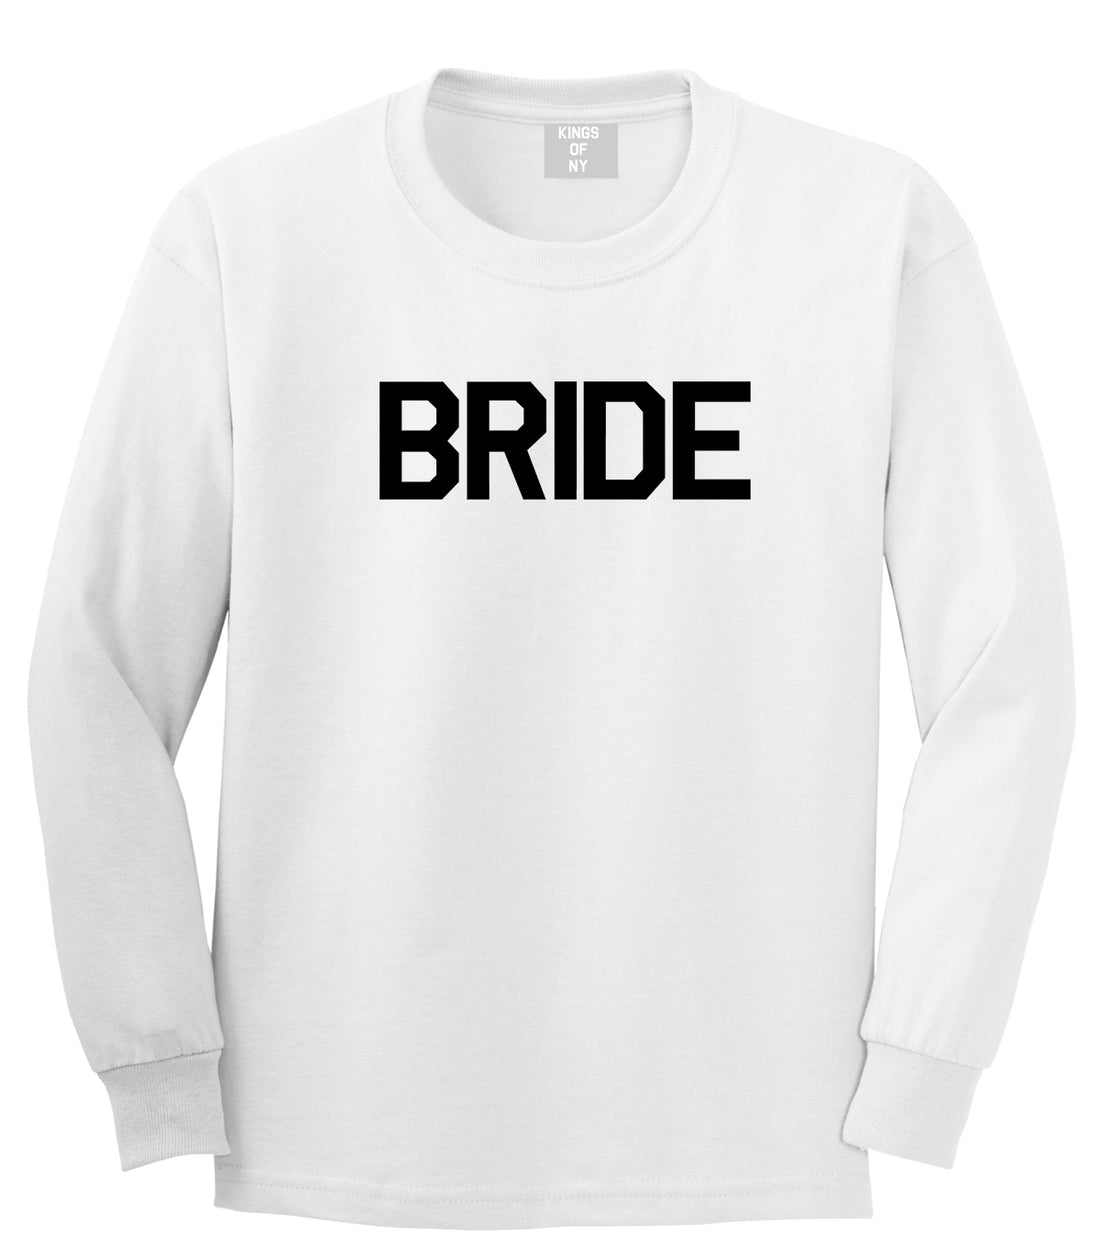 Bride Bachlorette Party White Long Sleeve T-Shirt by Kings Of NY